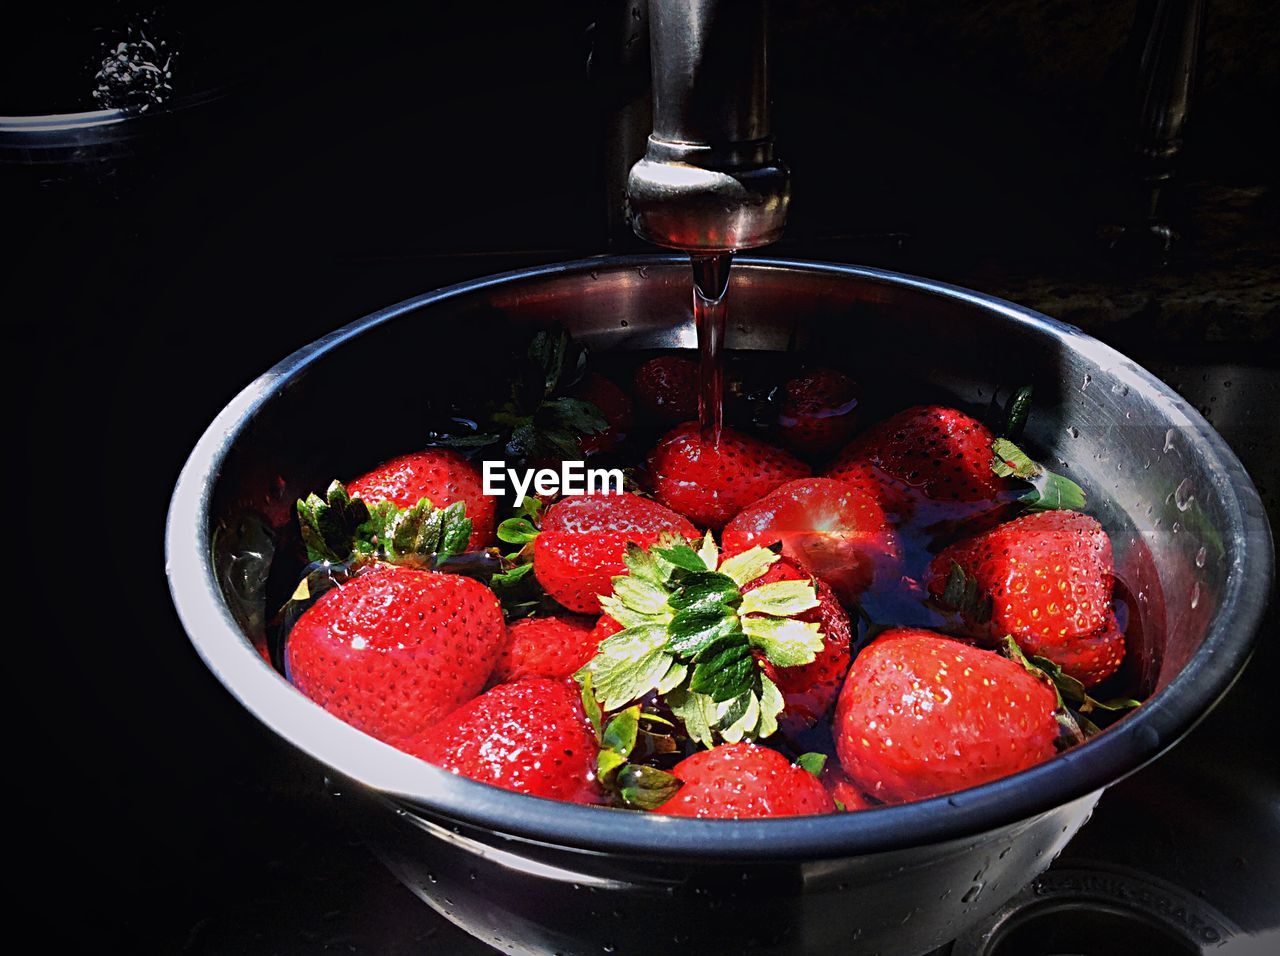 Faucet pouring water in strawberry bowl